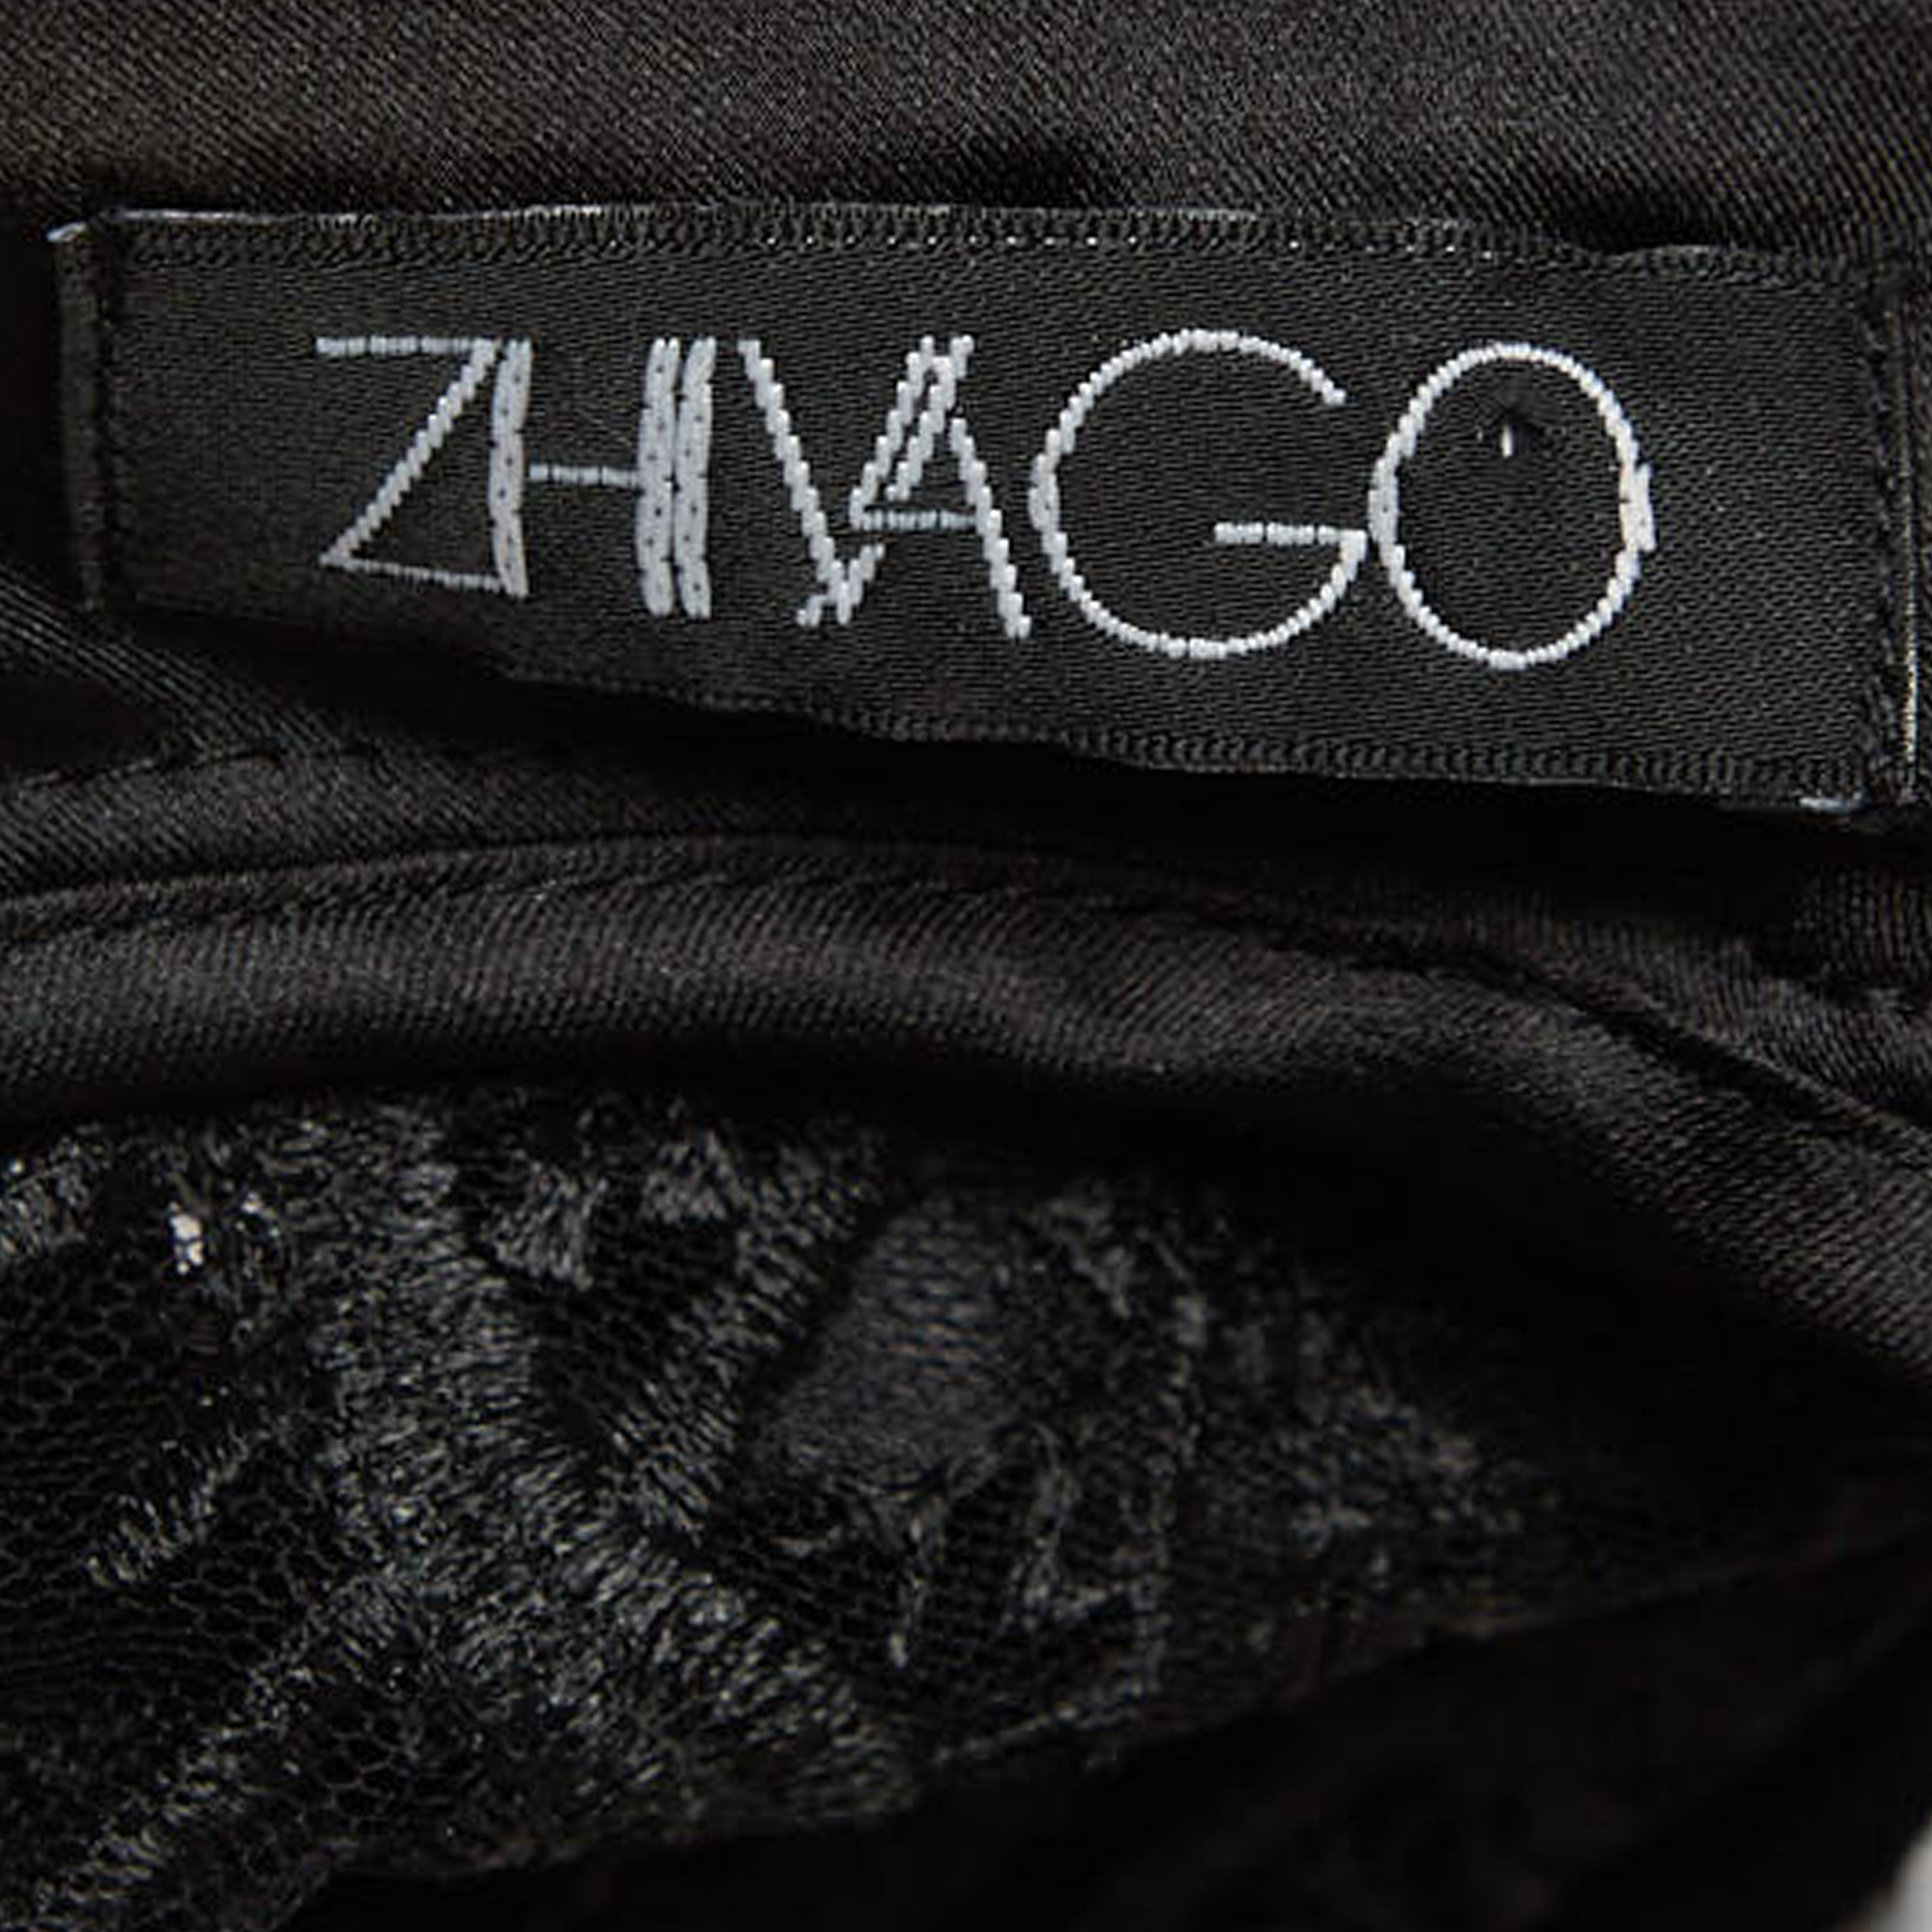 Zhivago Black Embroidered Mesh High Neck Sheer Top M